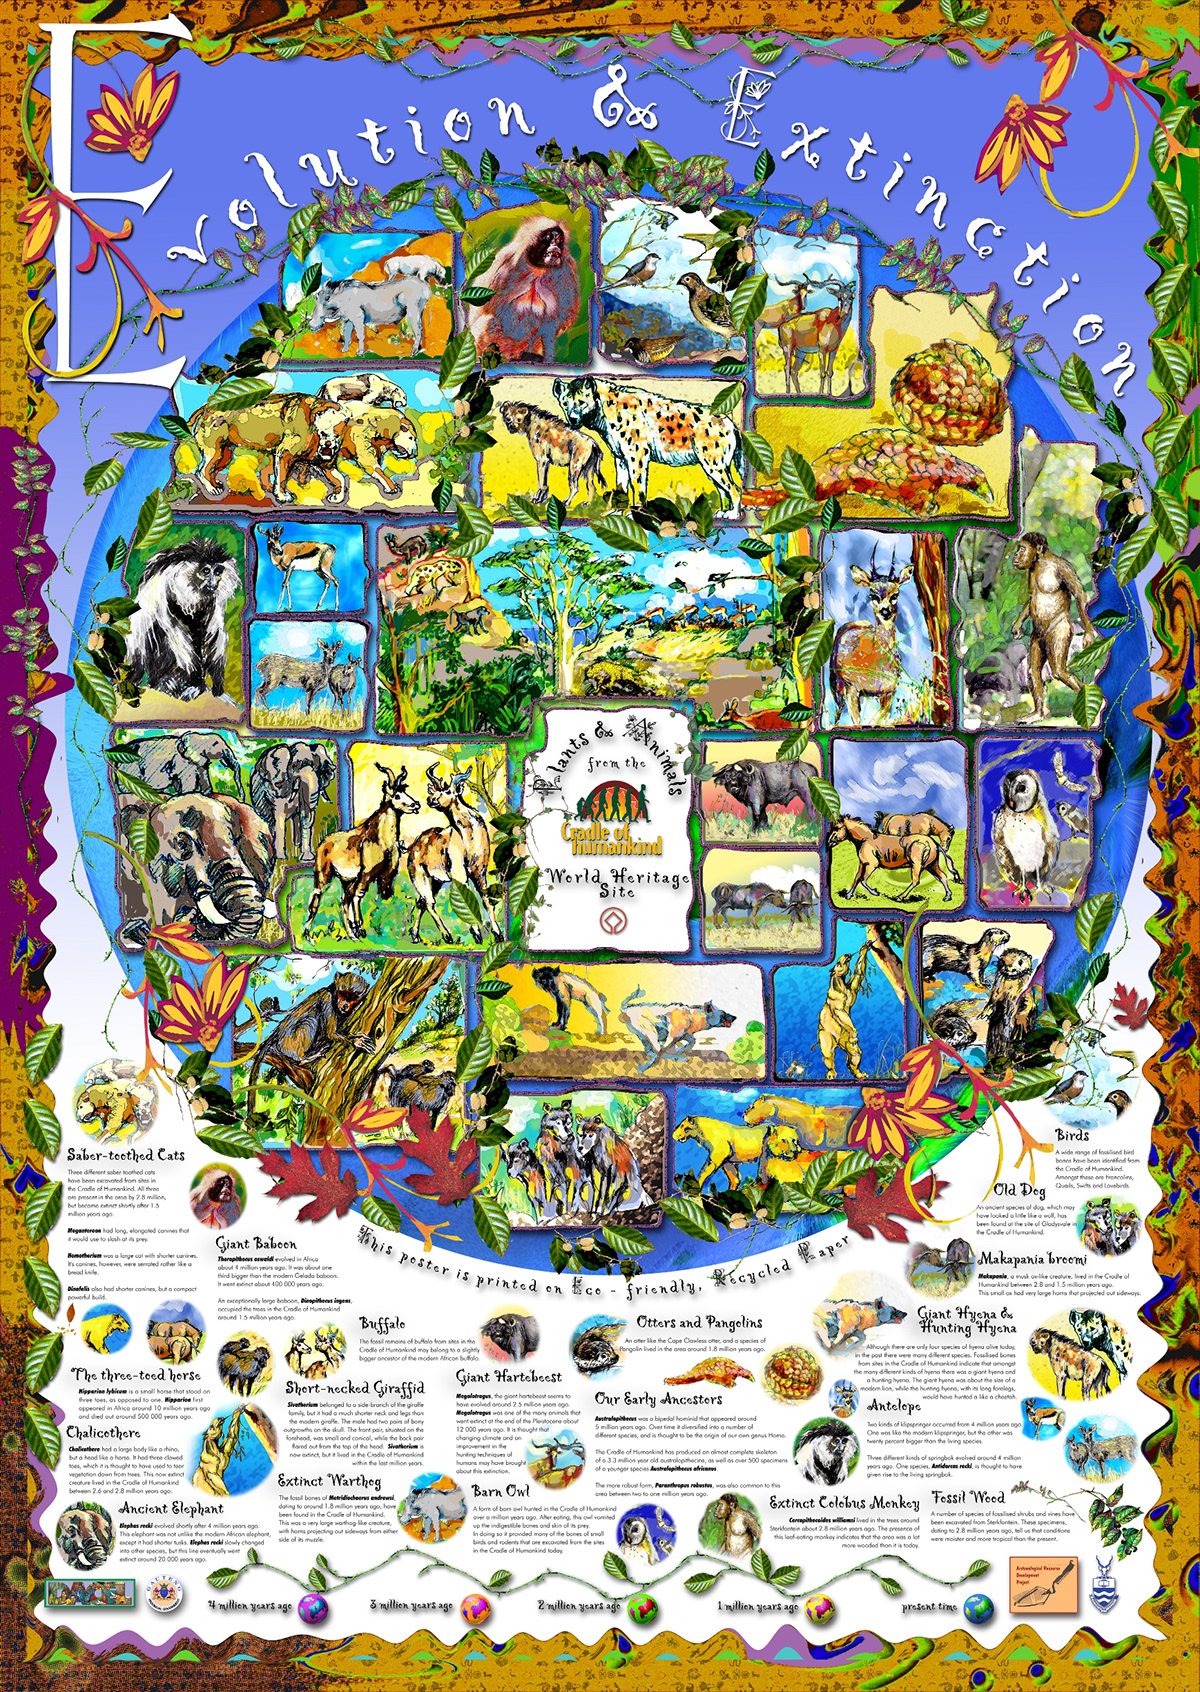 archeaology cradle of humankind educational posters World Heritage Site tools evolution environment south africa fossils animals map